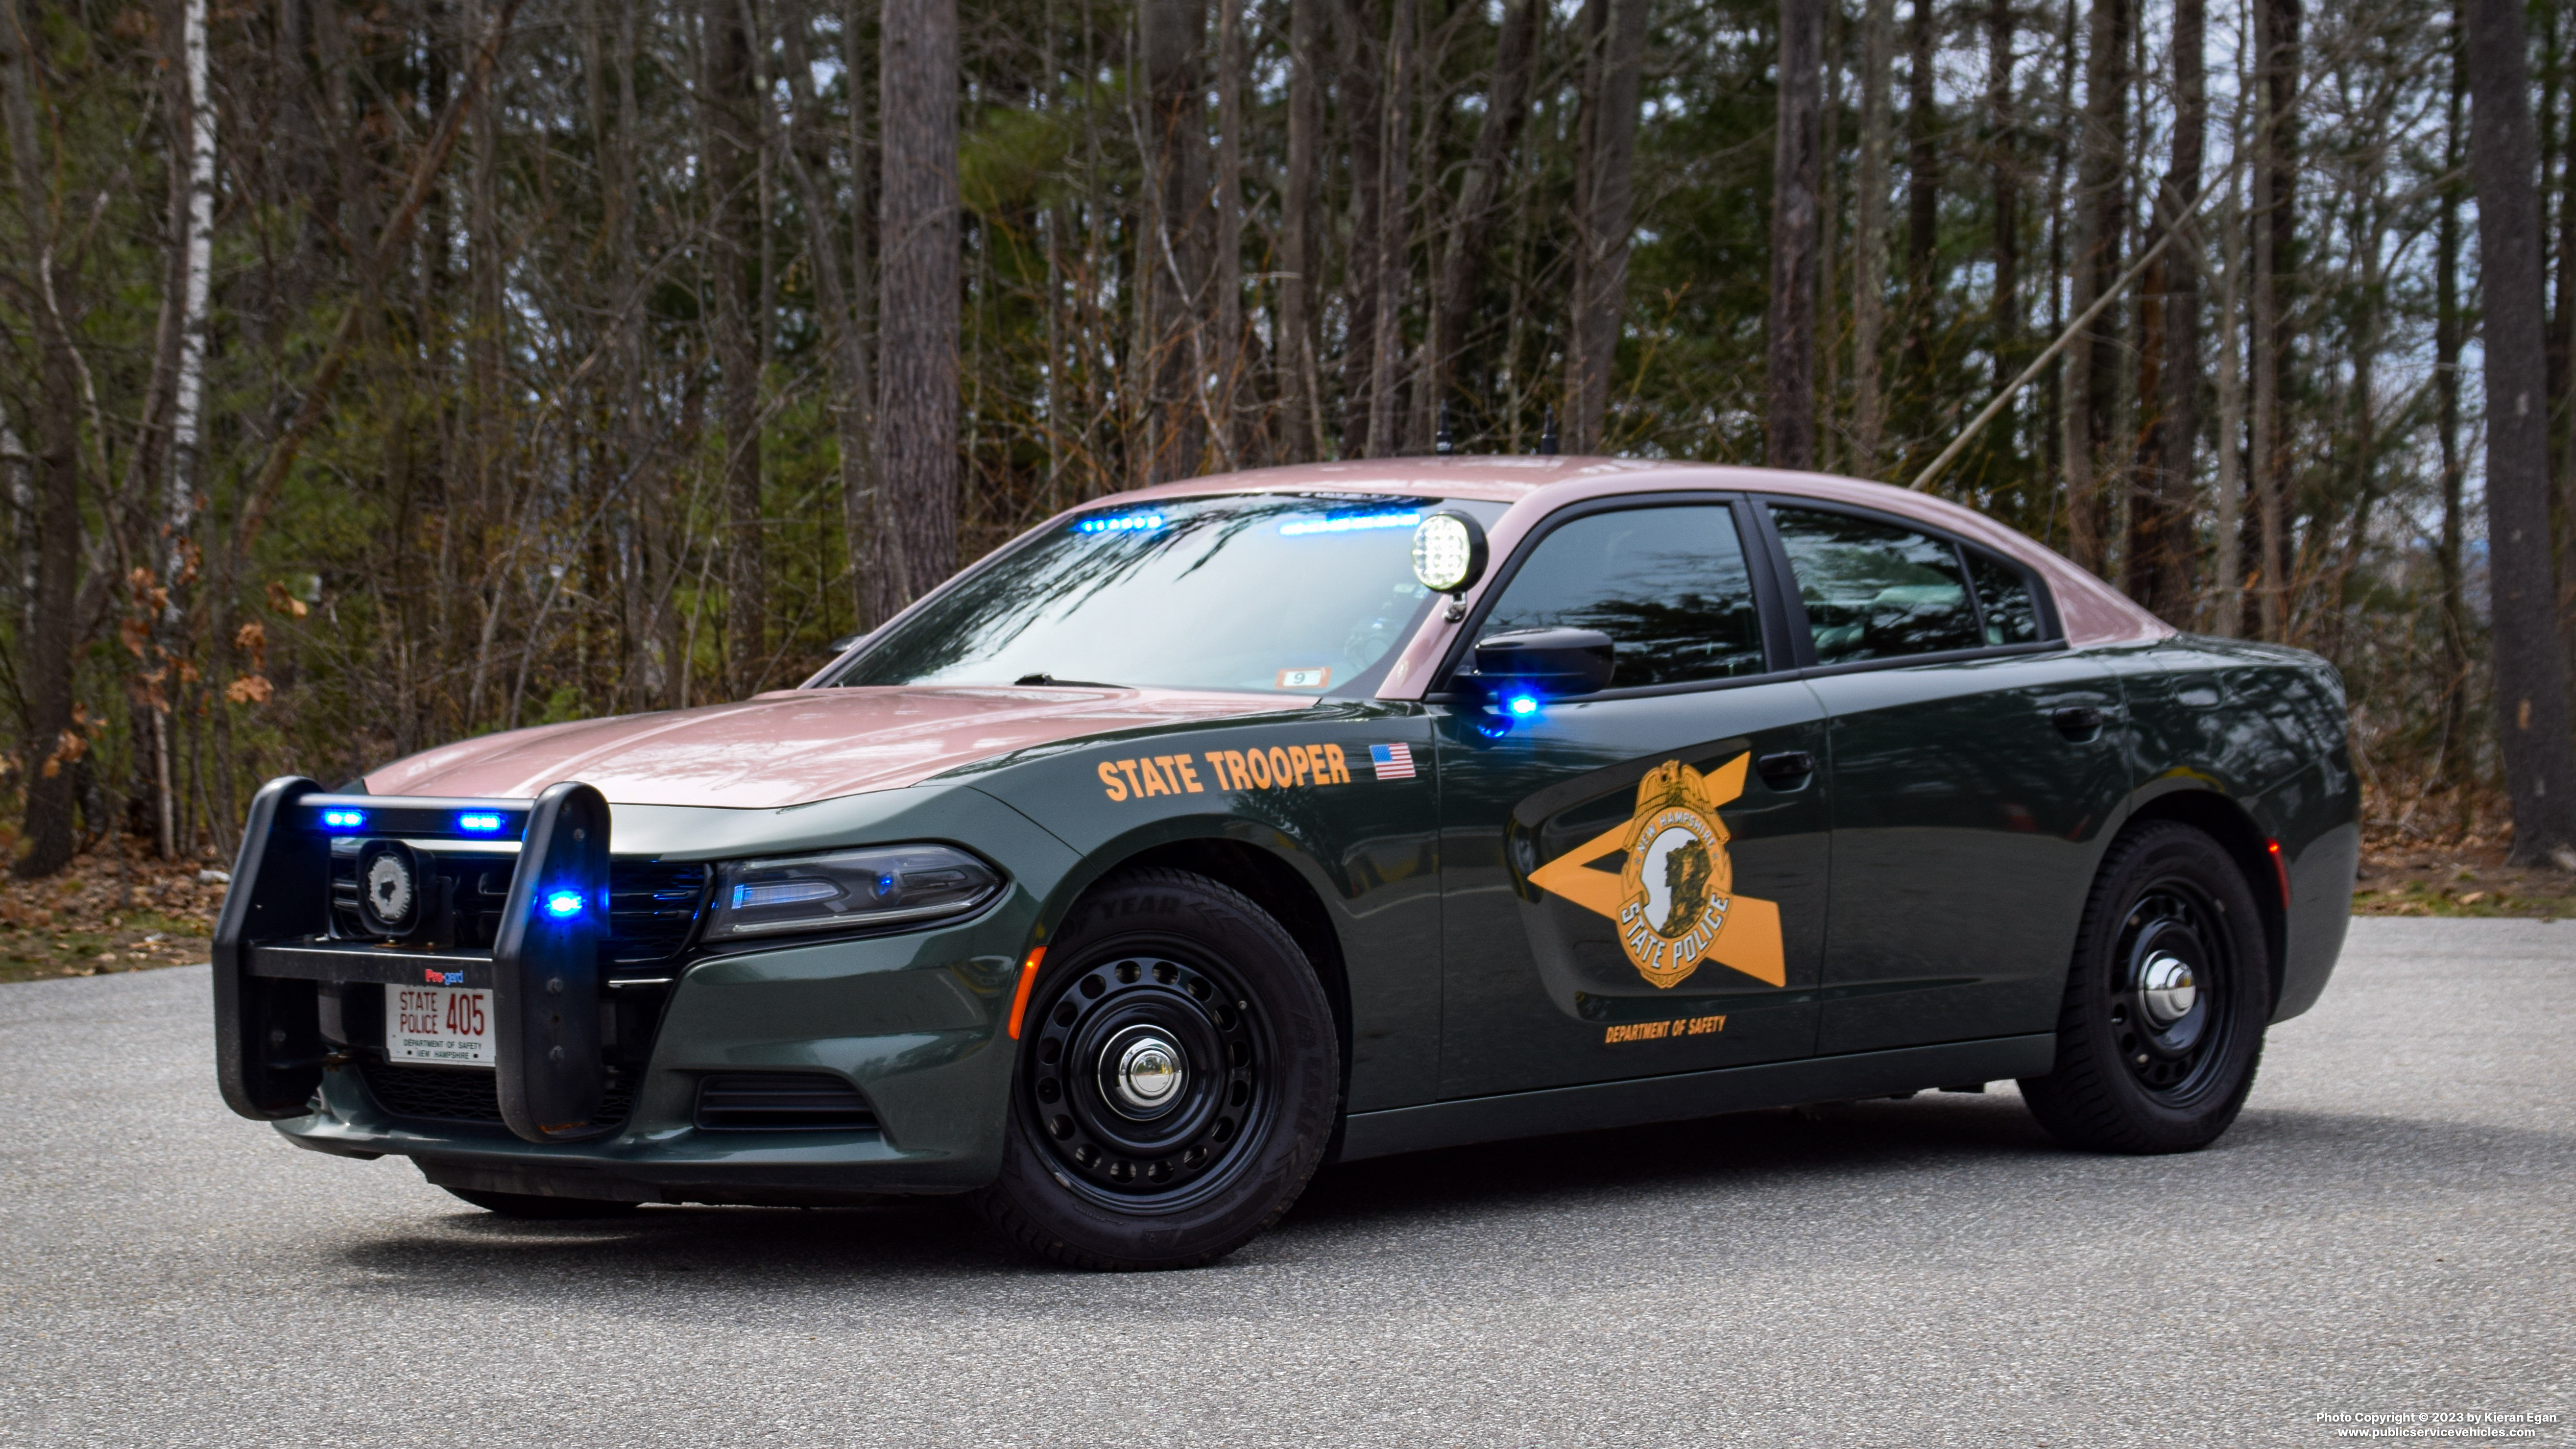 A photo  of New Hampshire State Police
            Cruiser 405, a 2018-2021 Dodge Charger             taken by Kieran Egan